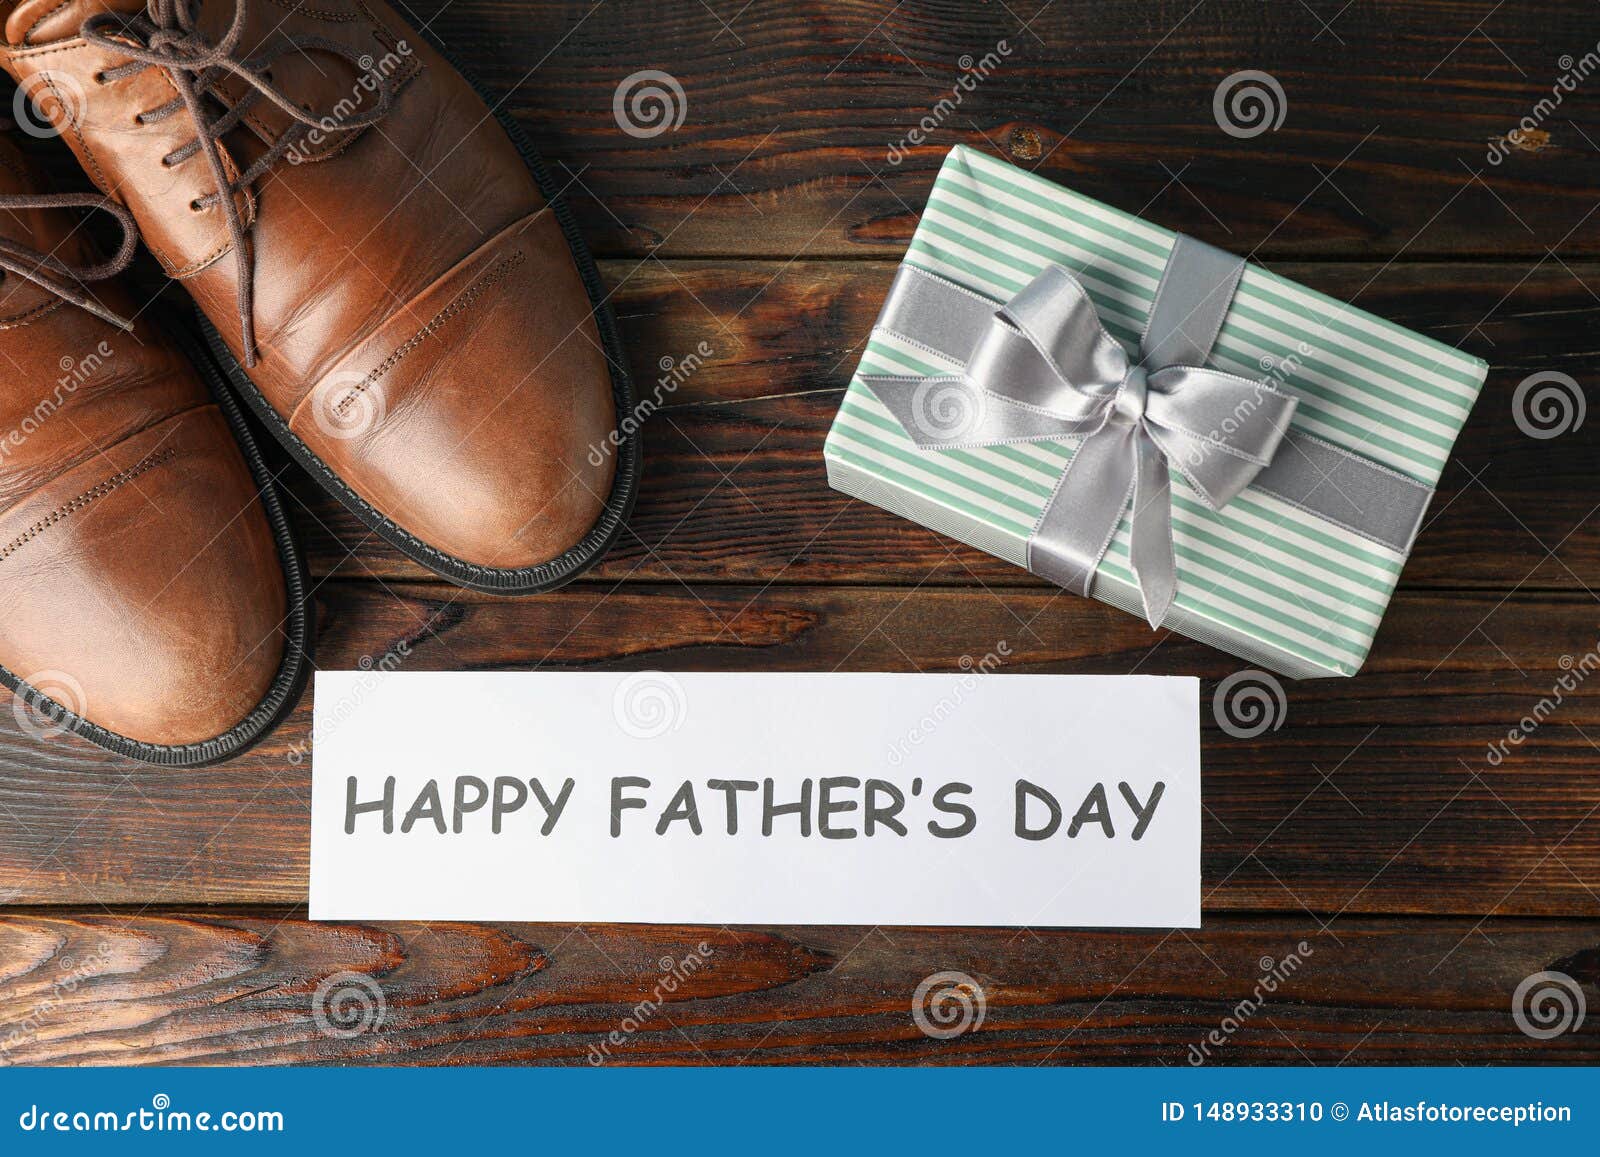 happy fathers day daddy pov pictures & video